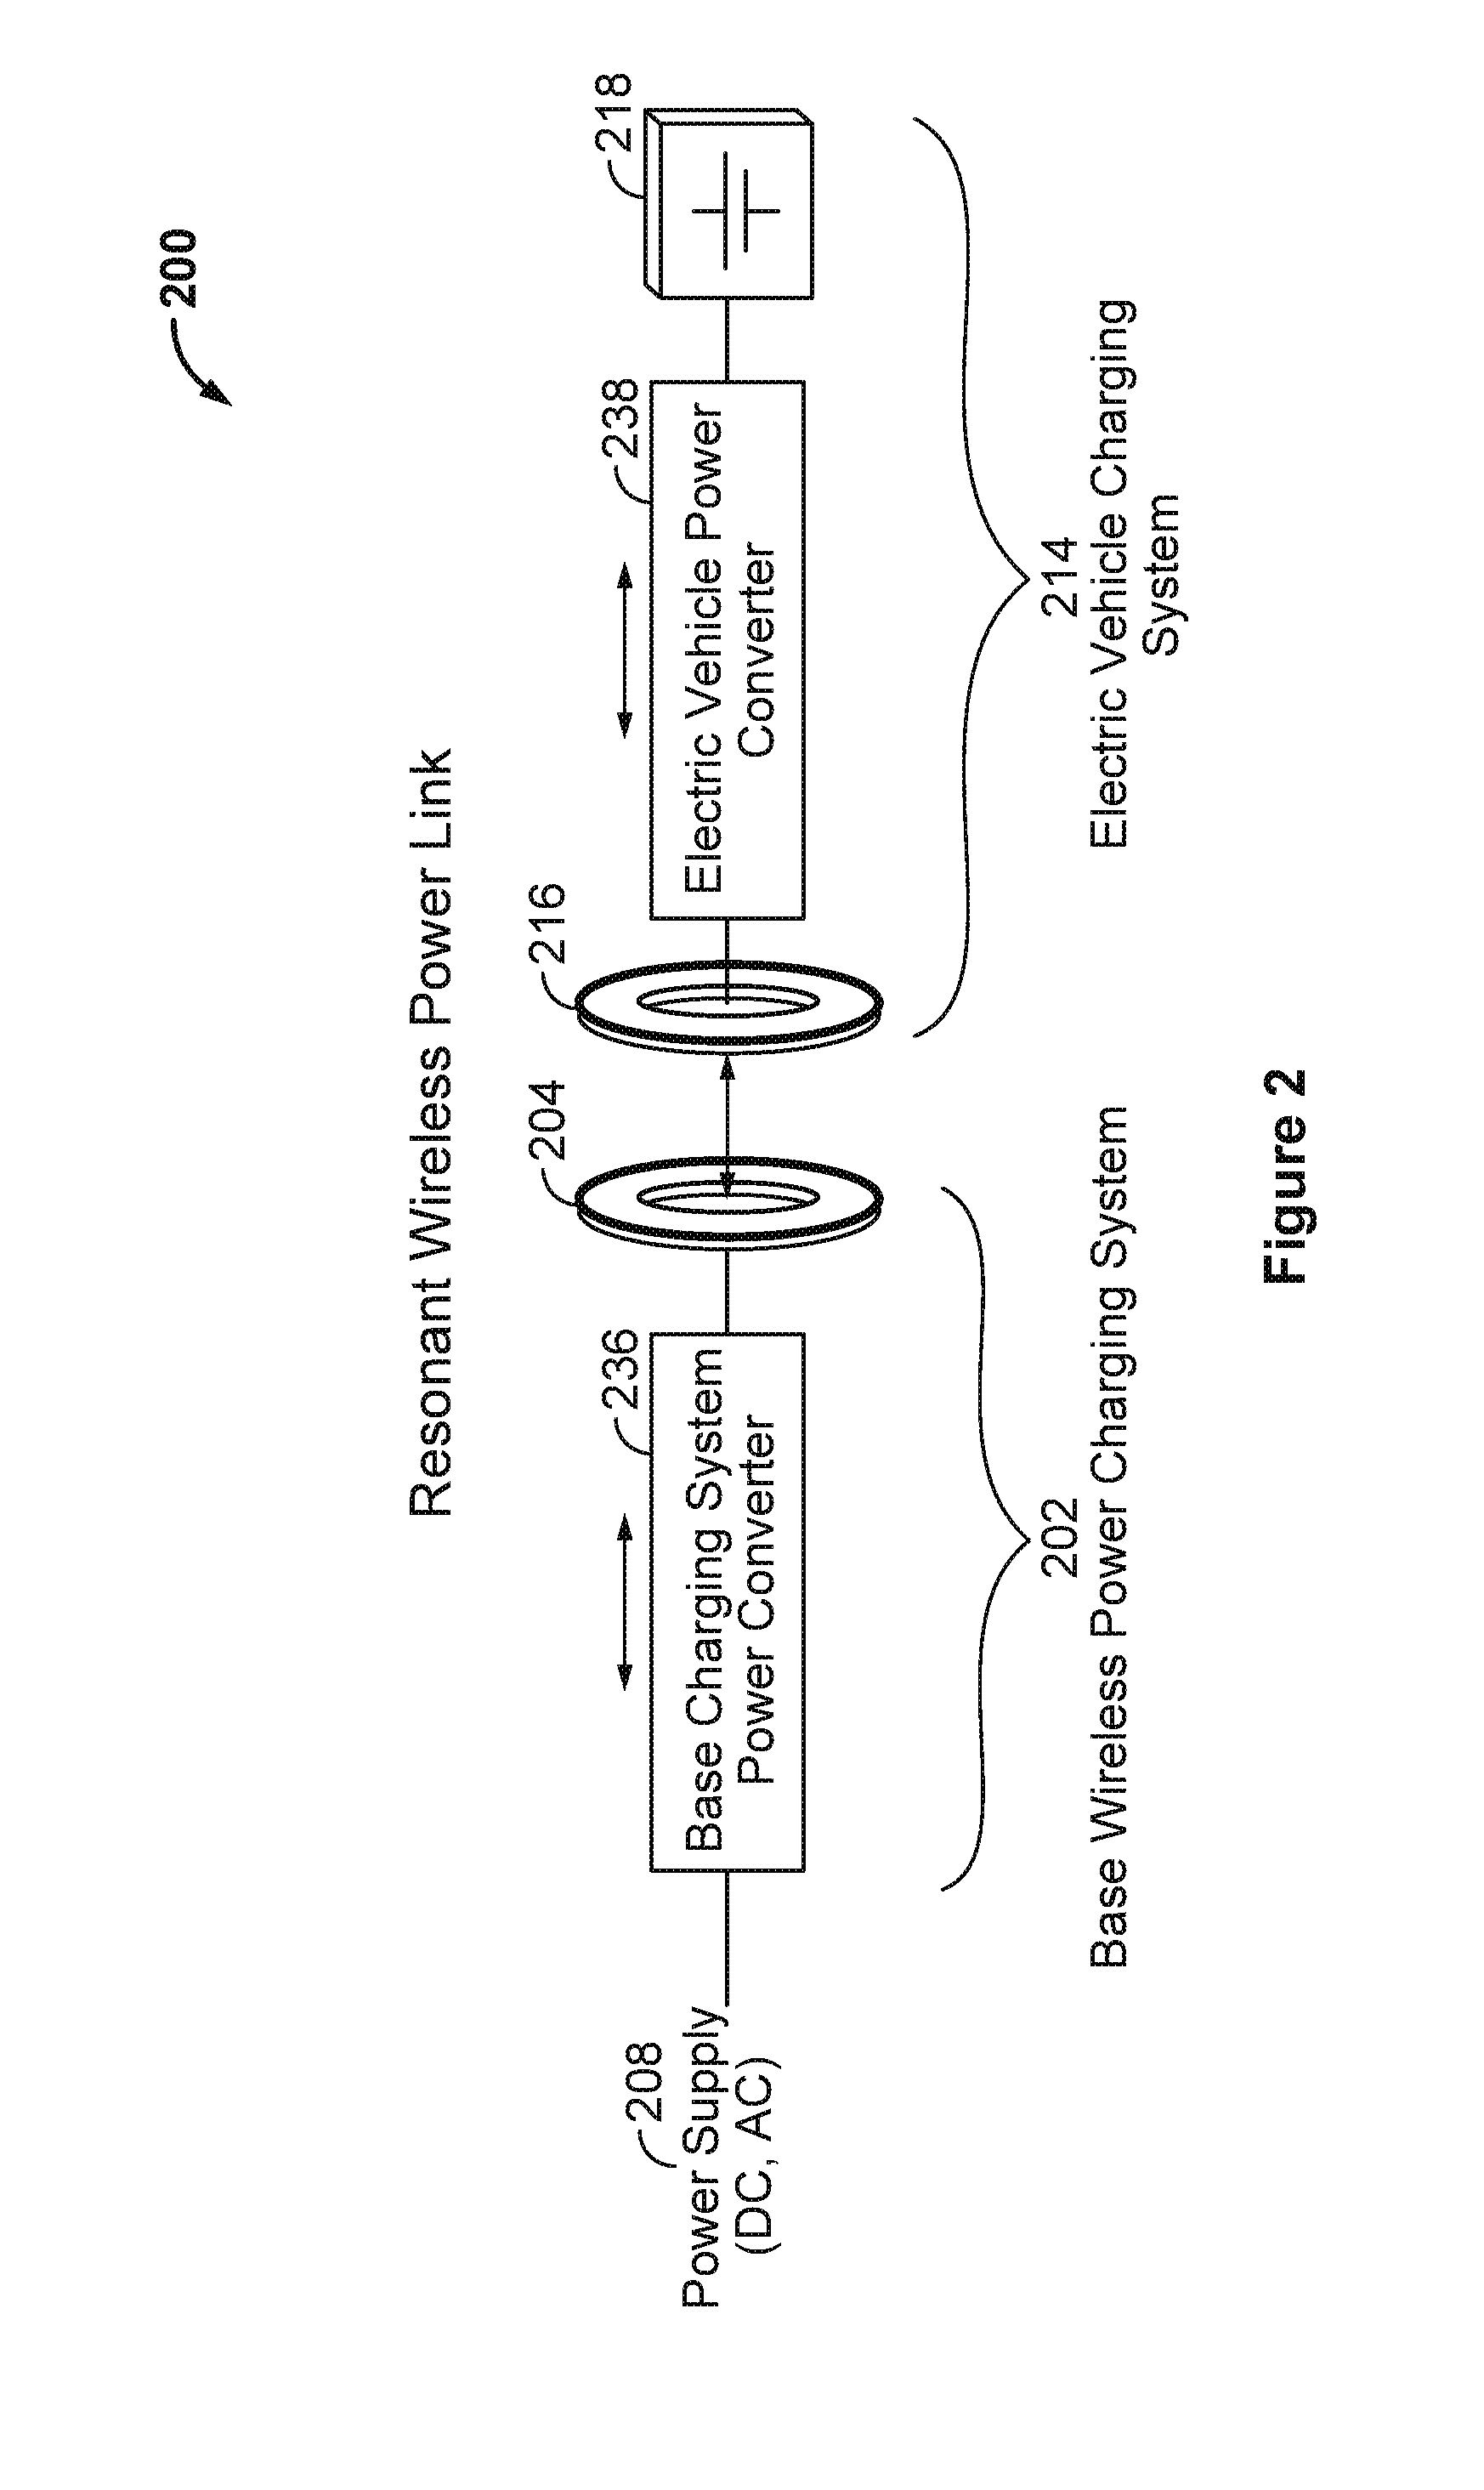 Wireless energy transfer and continuous radio station signal coexistence